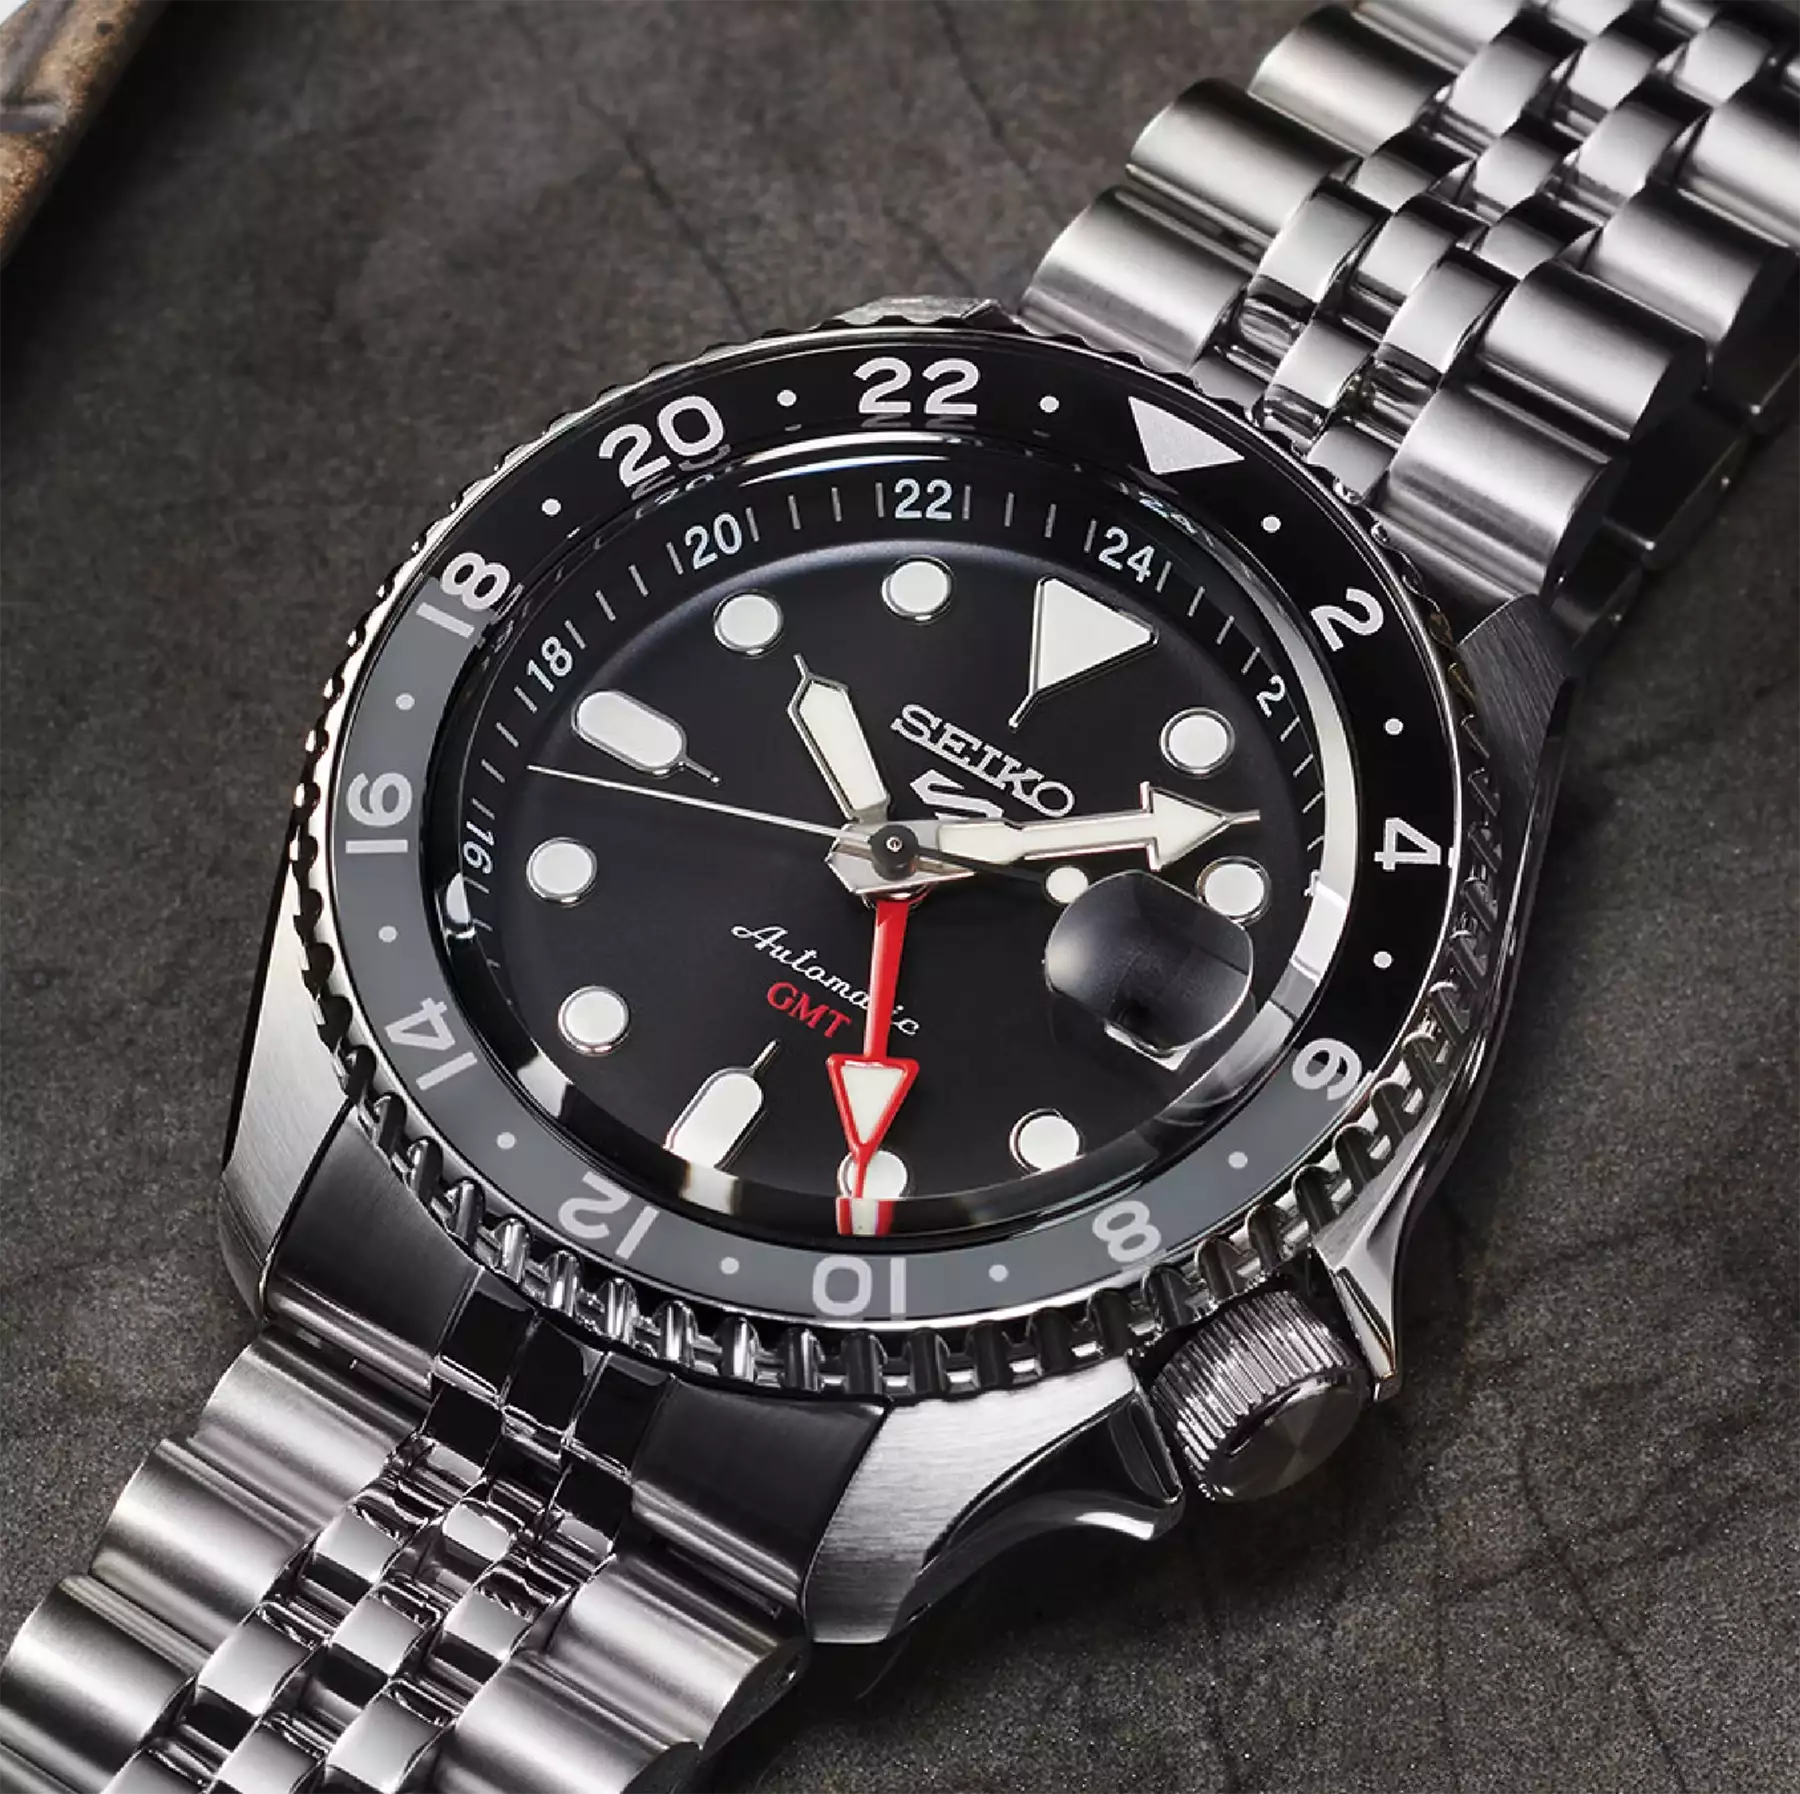 The One You've Been Waiting For - Meet The Seiko 5 Sports GMT - Worn & Wound